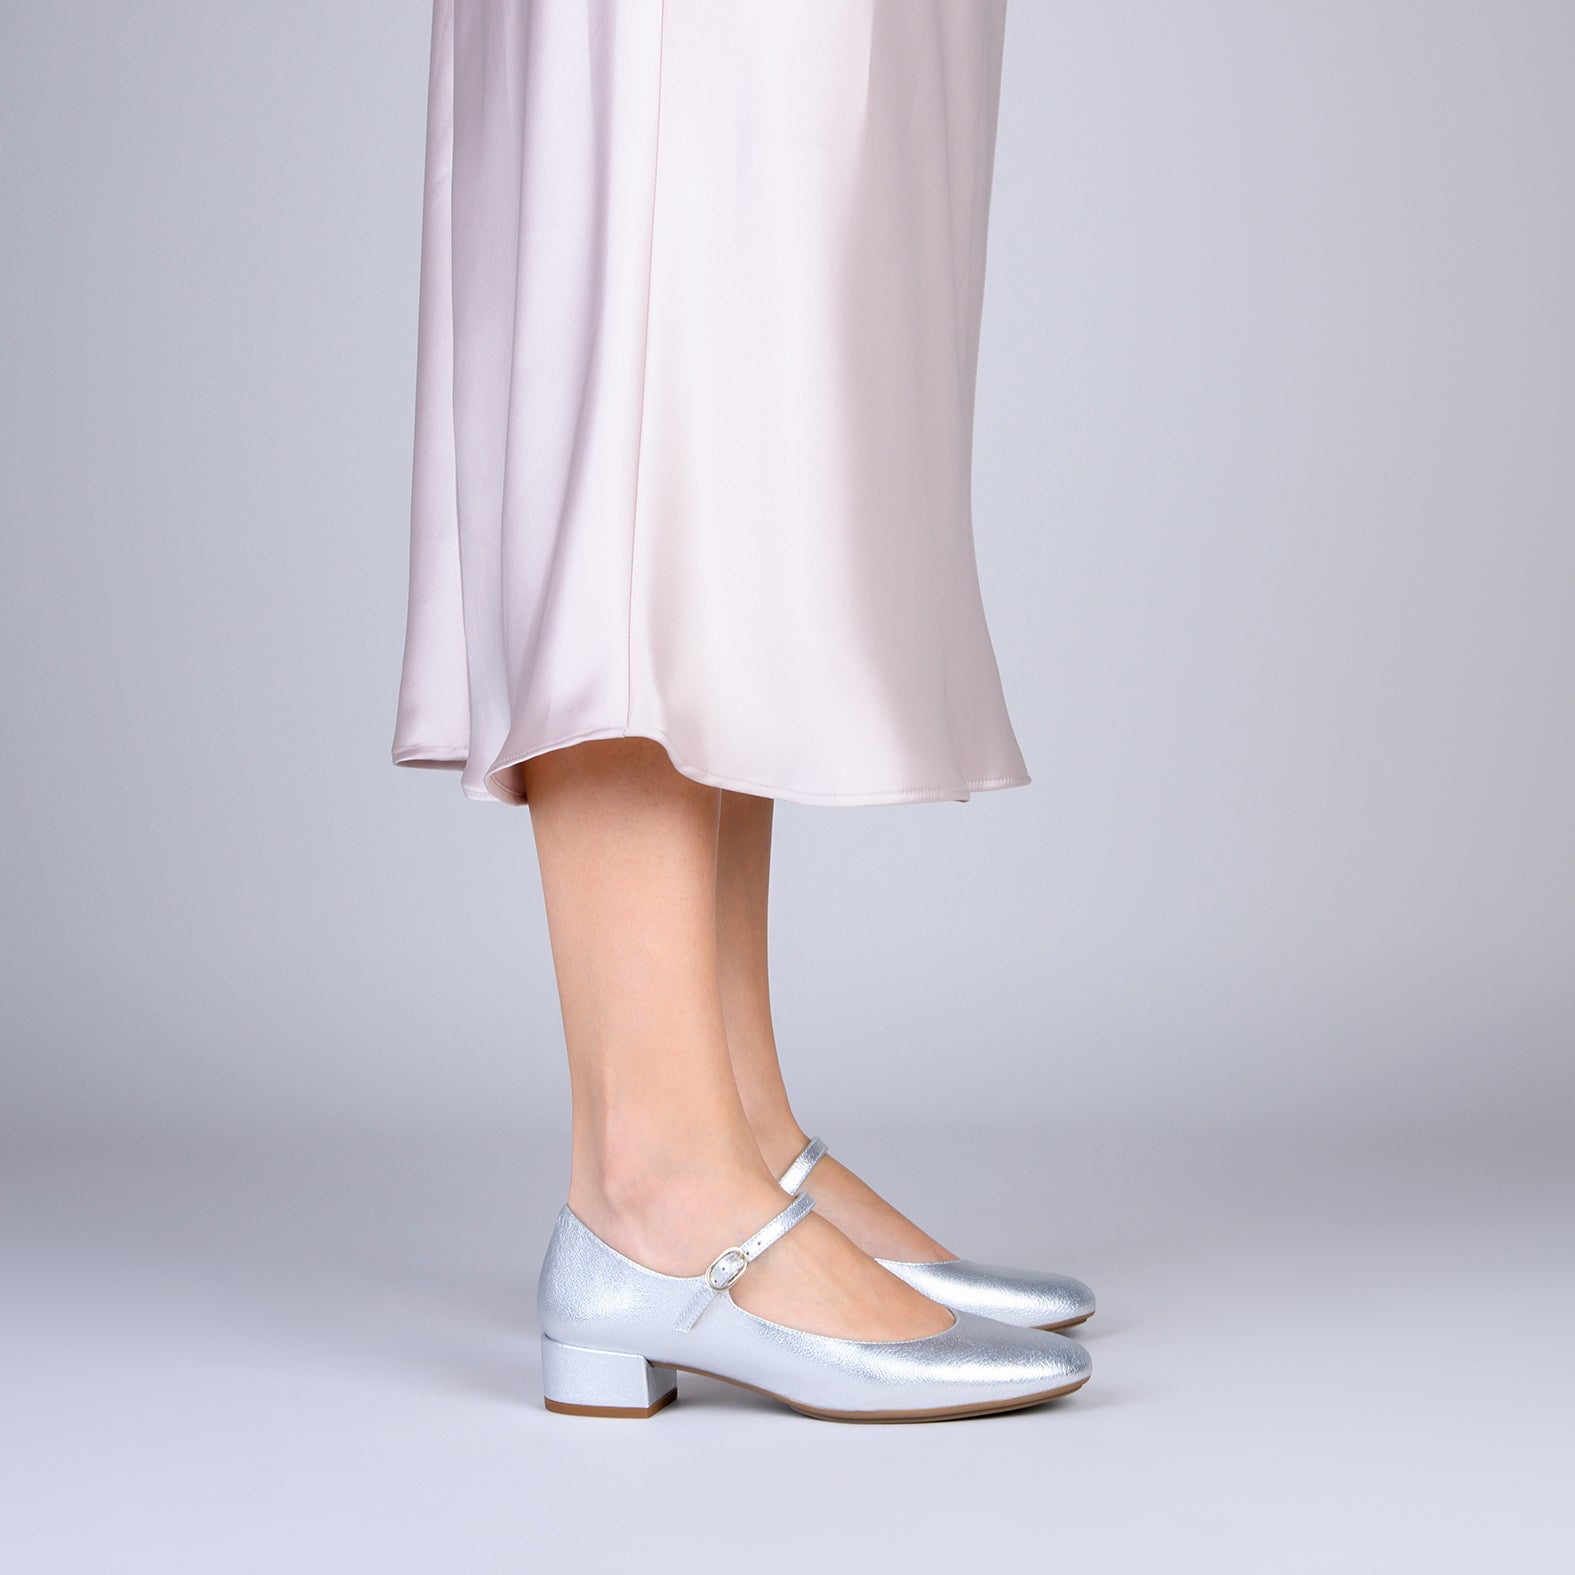 NORA – SILVER Mary-Janes with low heel 